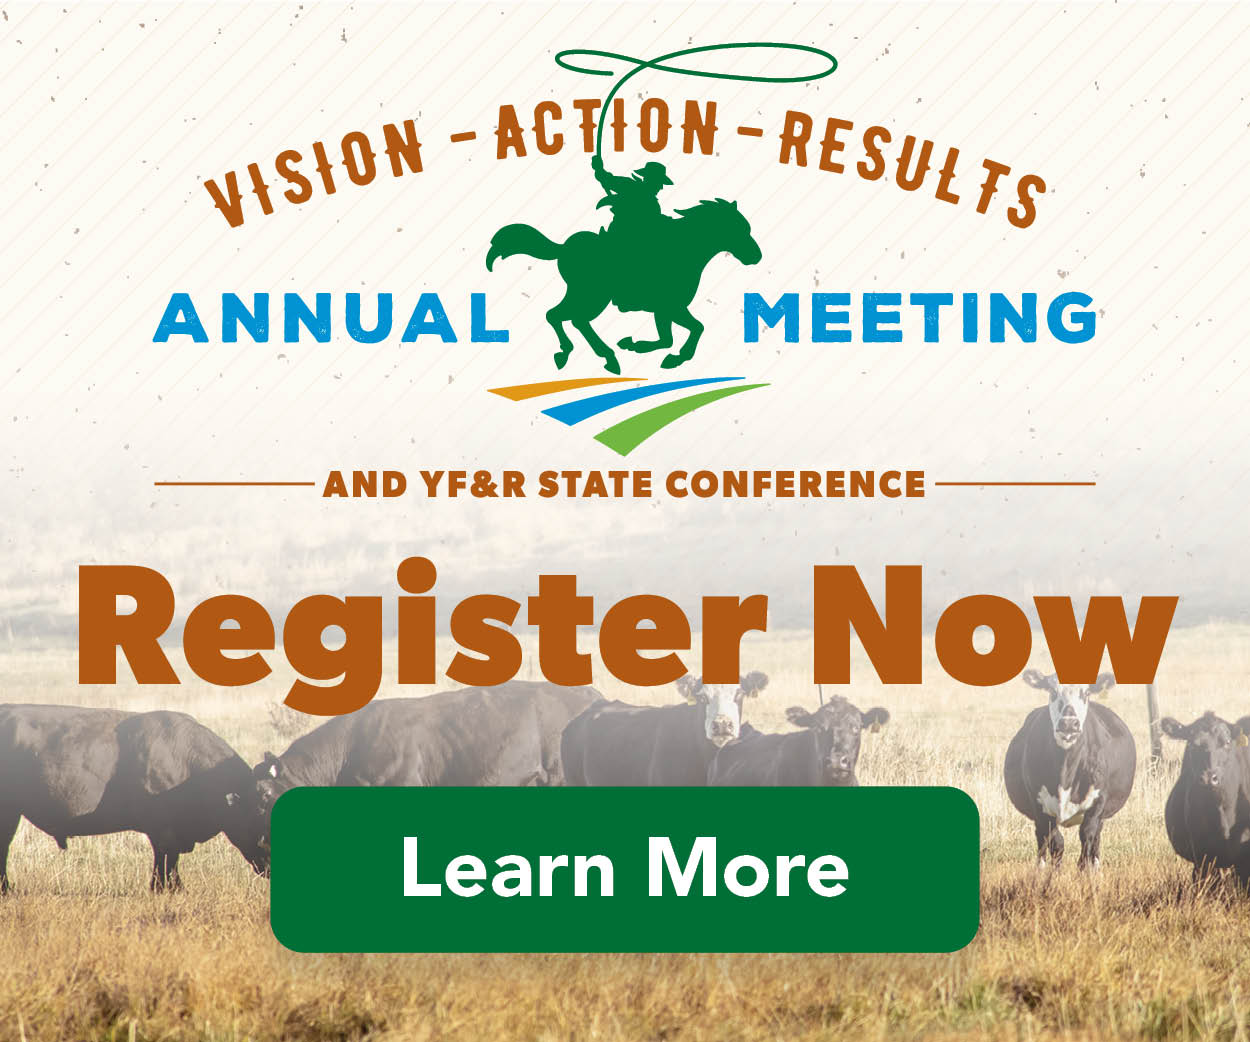 Register now for Annual Meeting